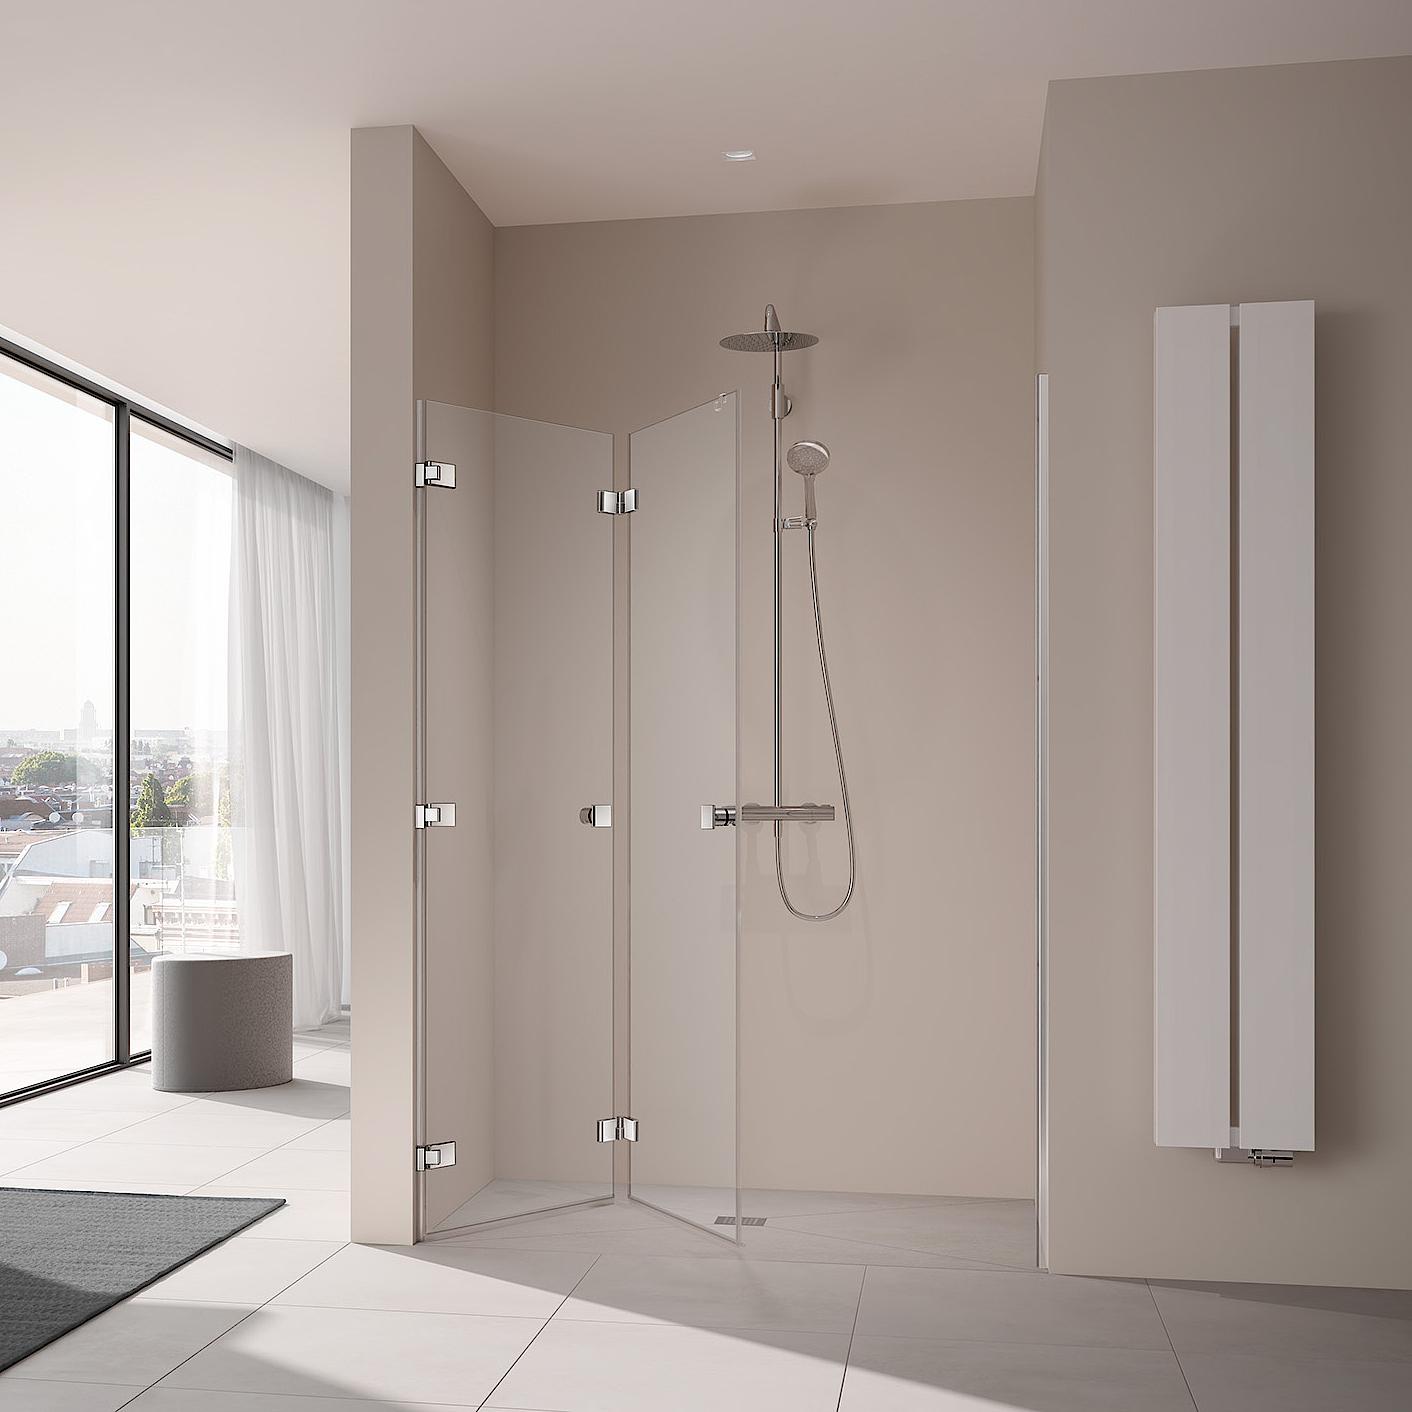 Kermi shower enclosure MENA single-panel folding door with 3rd wall hinge and additional handle open